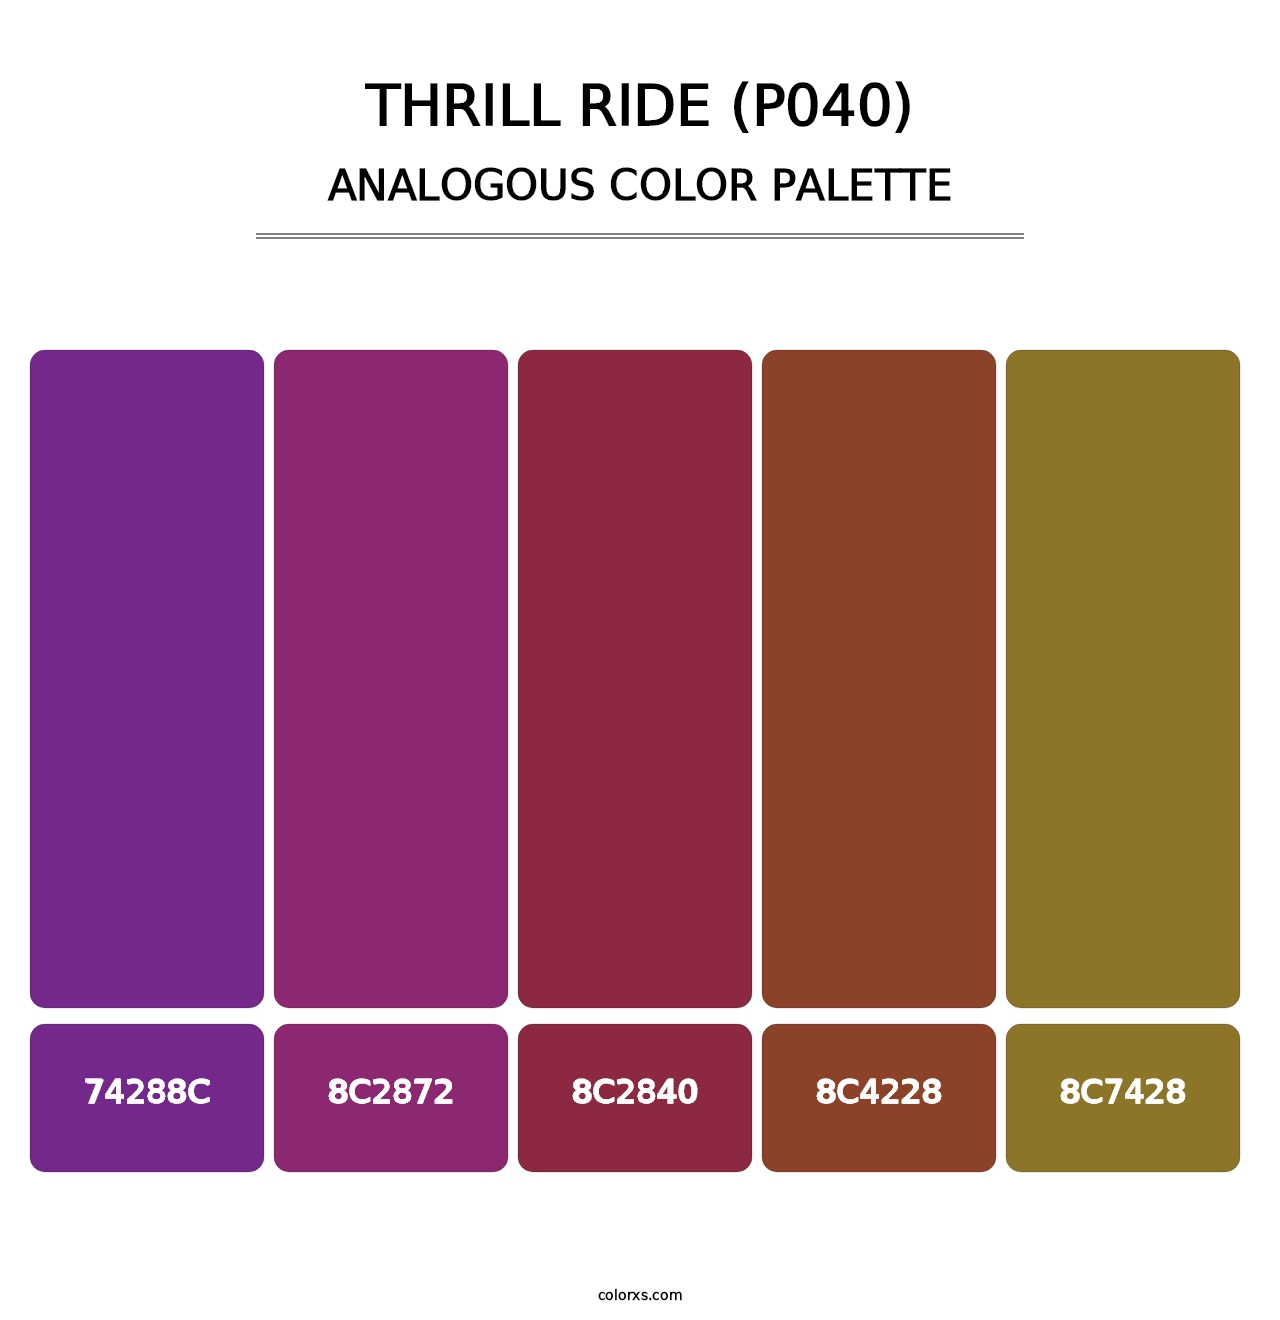 Thrill Ride (P040) - Analogous Color Palette